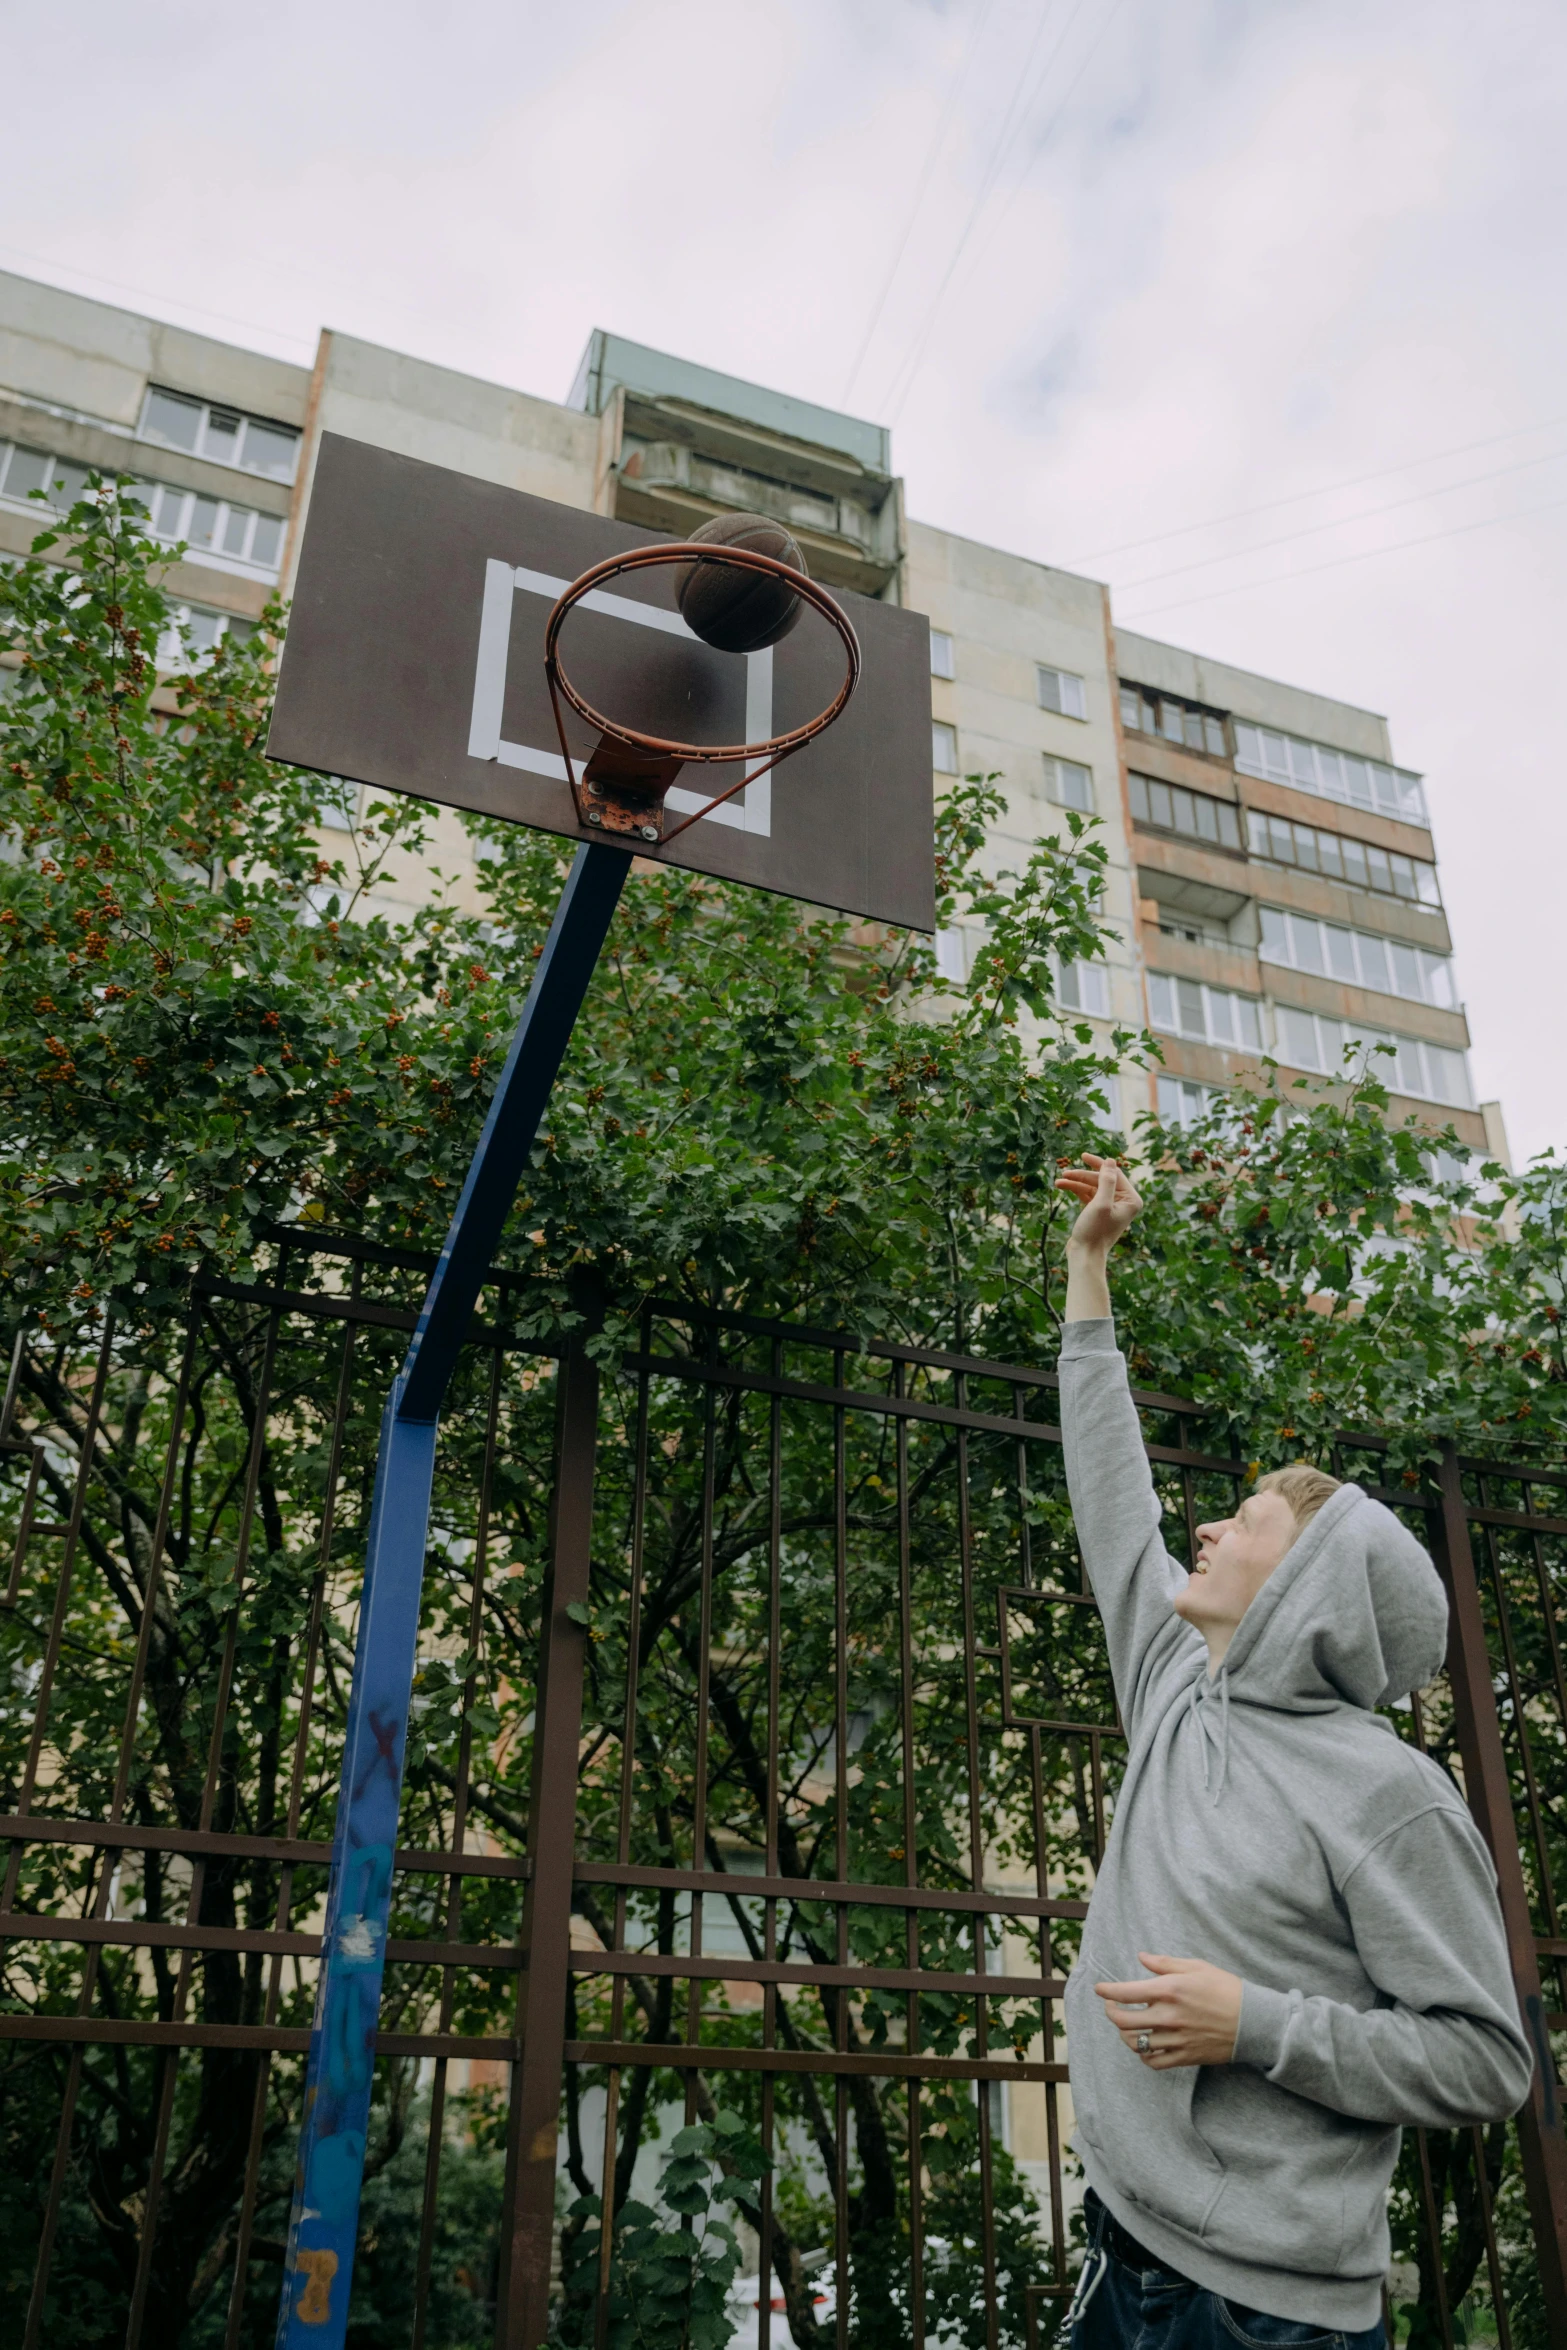 a man is shooting the basketball into the net